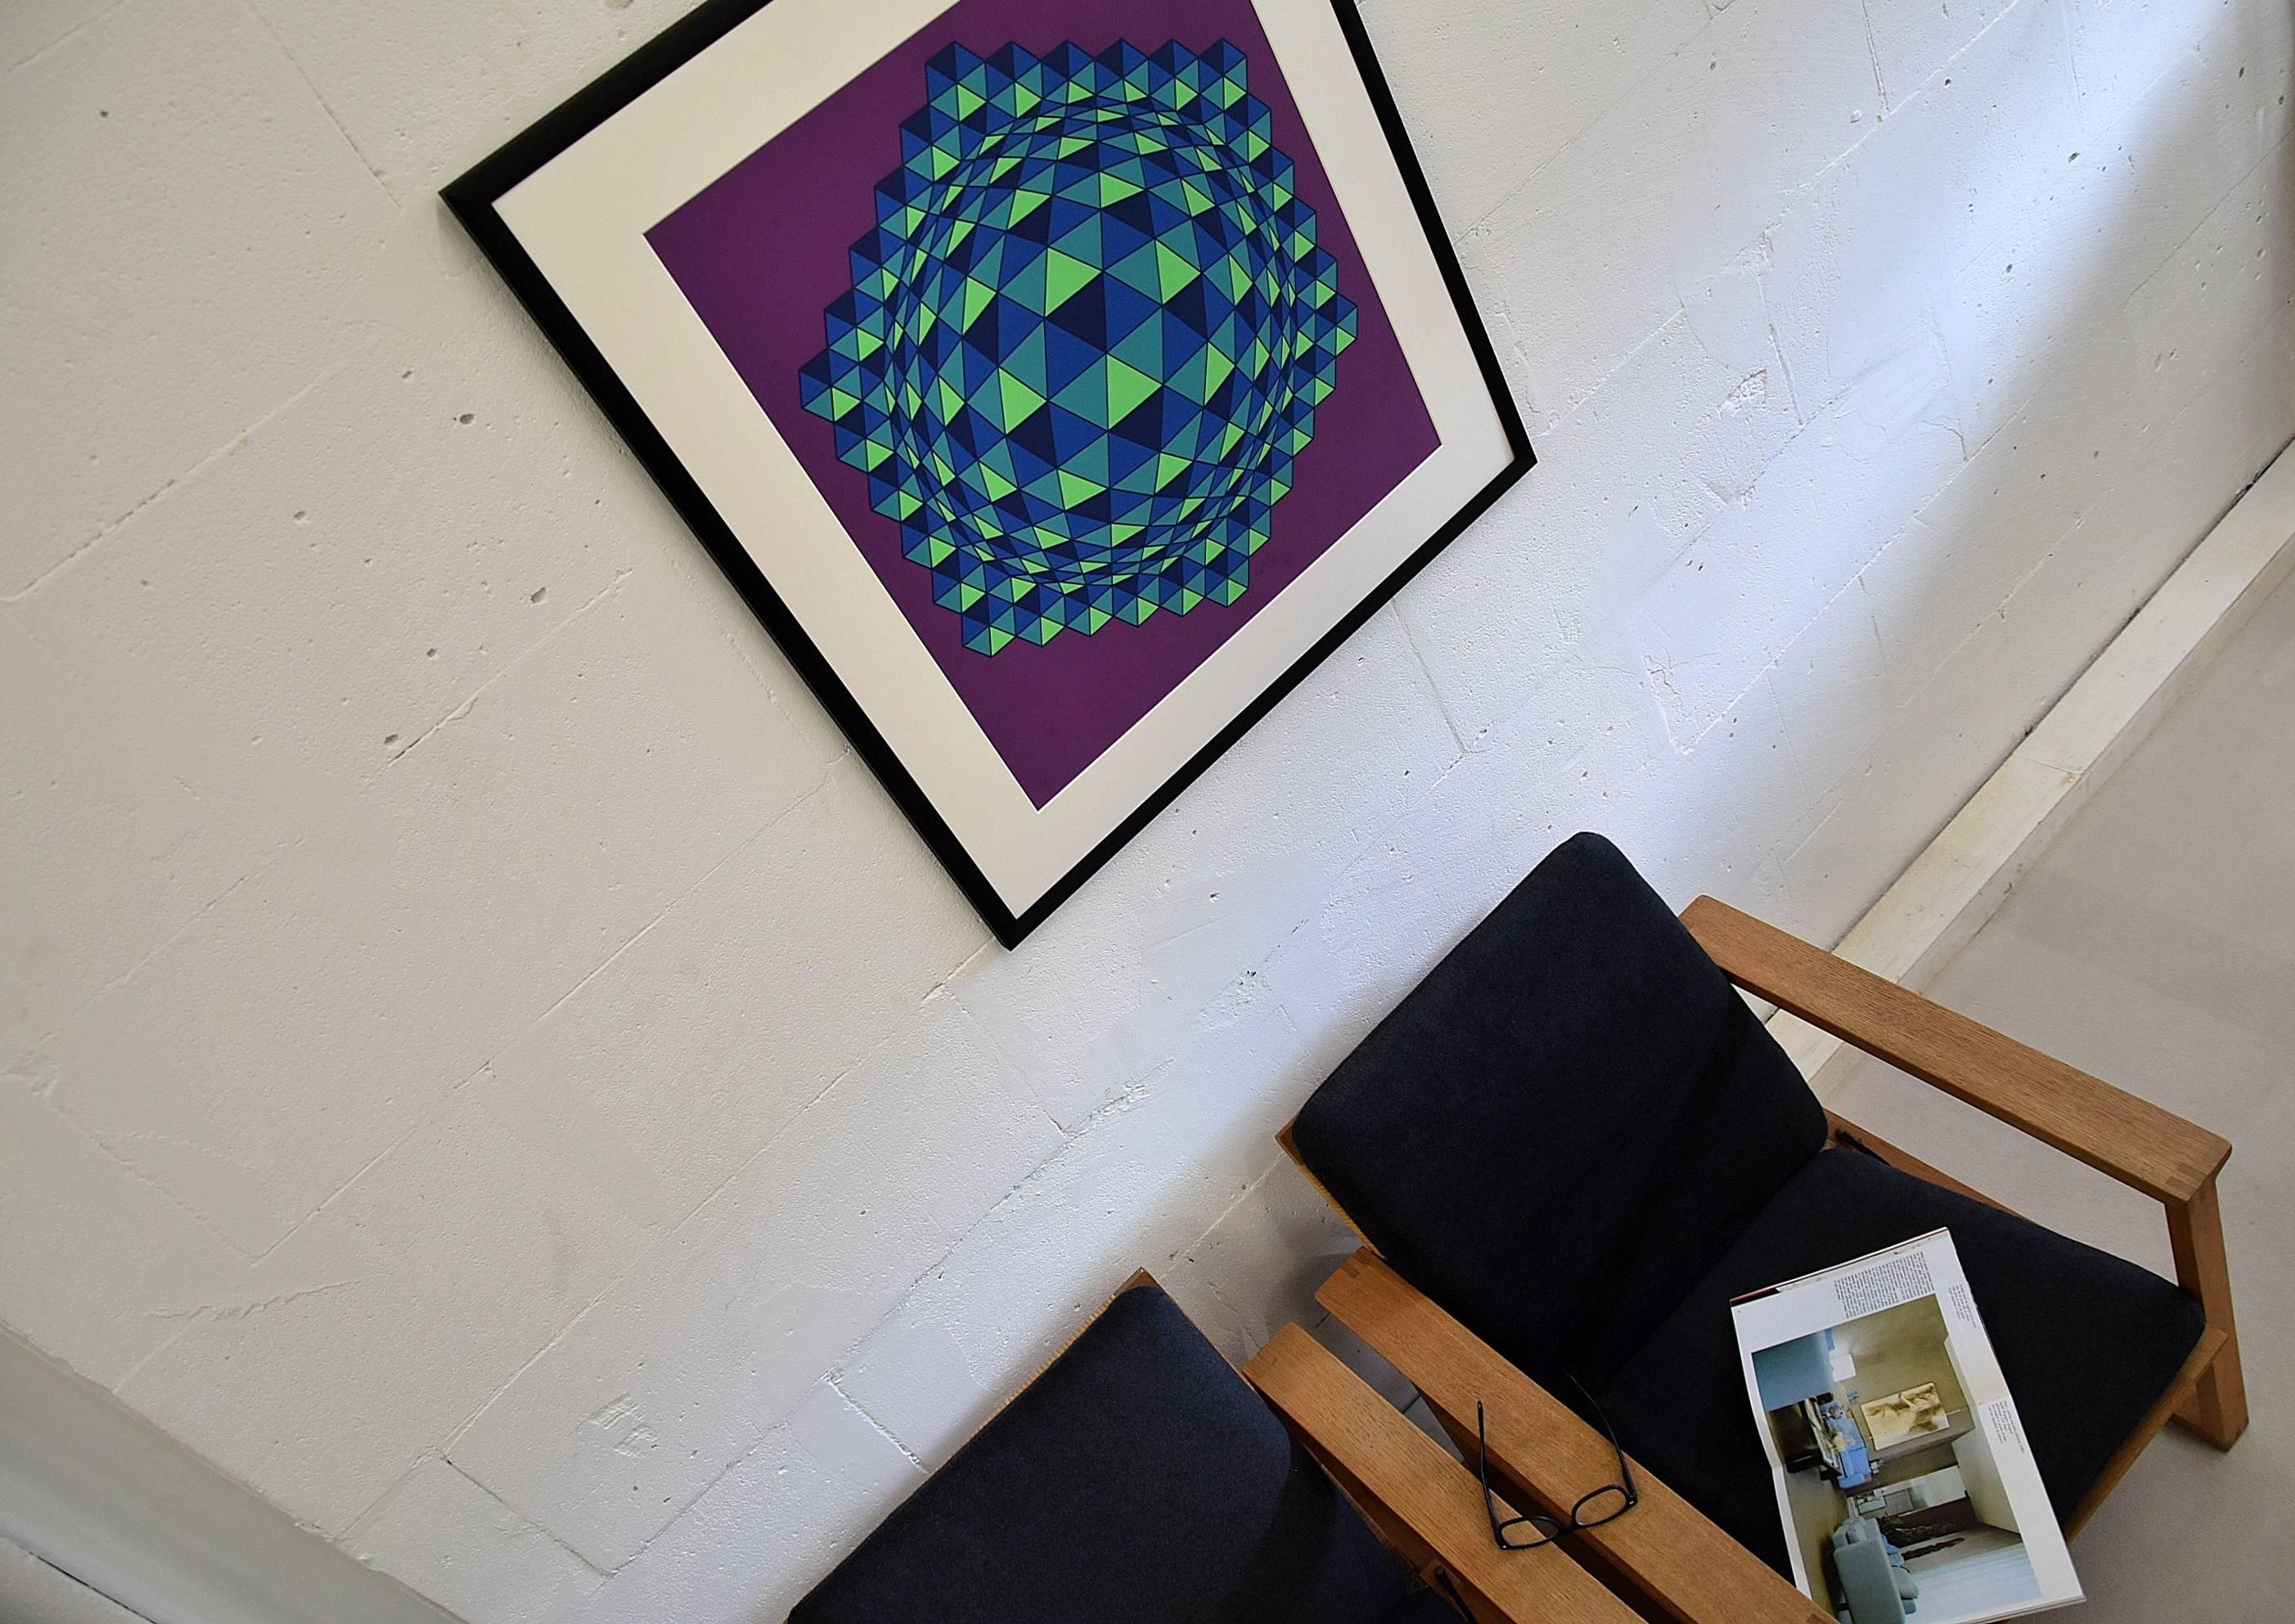 Vasarely Victor
Beautiful silkscreen print Art work, circa 1974 by Victor Vasarely.
This print is 05 from an edition of 190 and it is hand signed and numbered.

This beauty will be shipped overseas in a custom made wooden crate. Cost of transport to